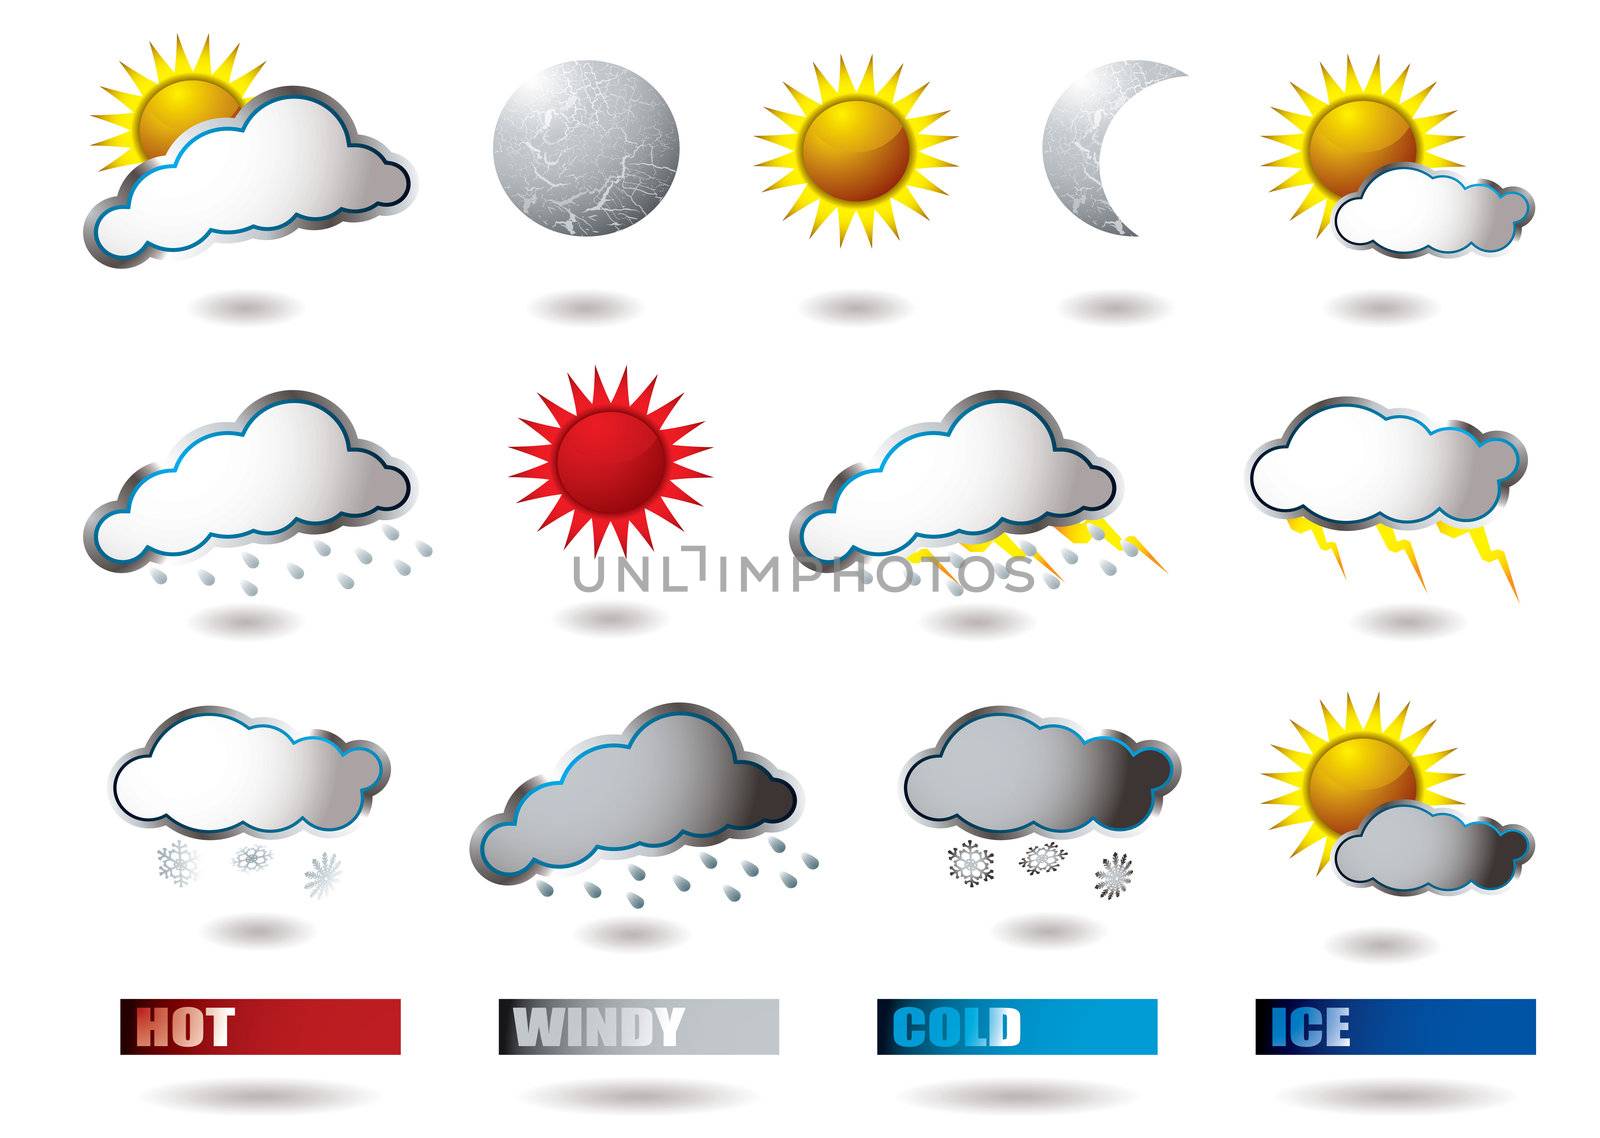 collection of weather icons all with drop shadow